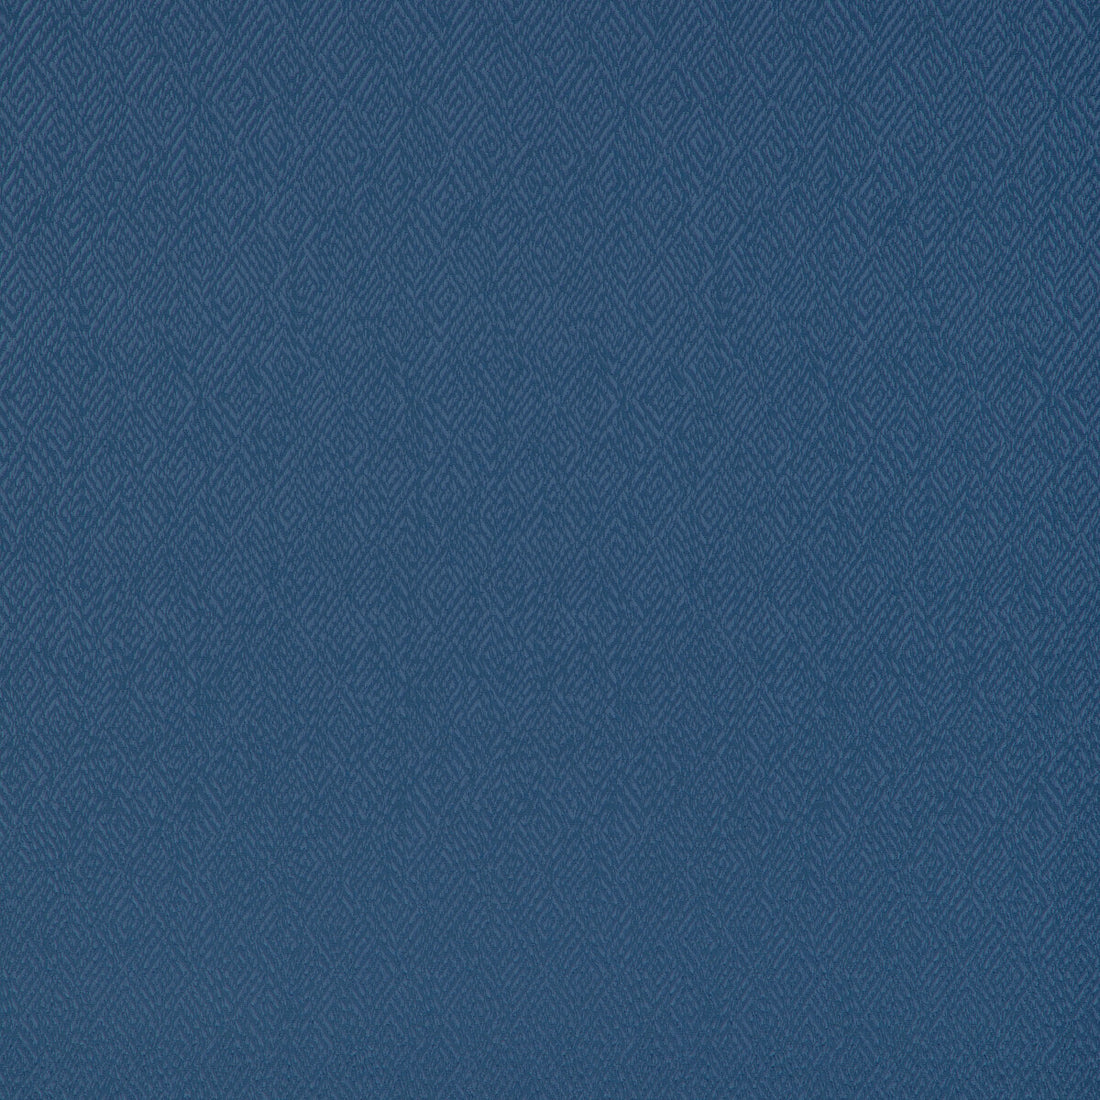 Pipet Texture fabric in blue color - pattern 8023152.50.0 - by Brunschwig &amp; Fils in the Vienne Silks collection